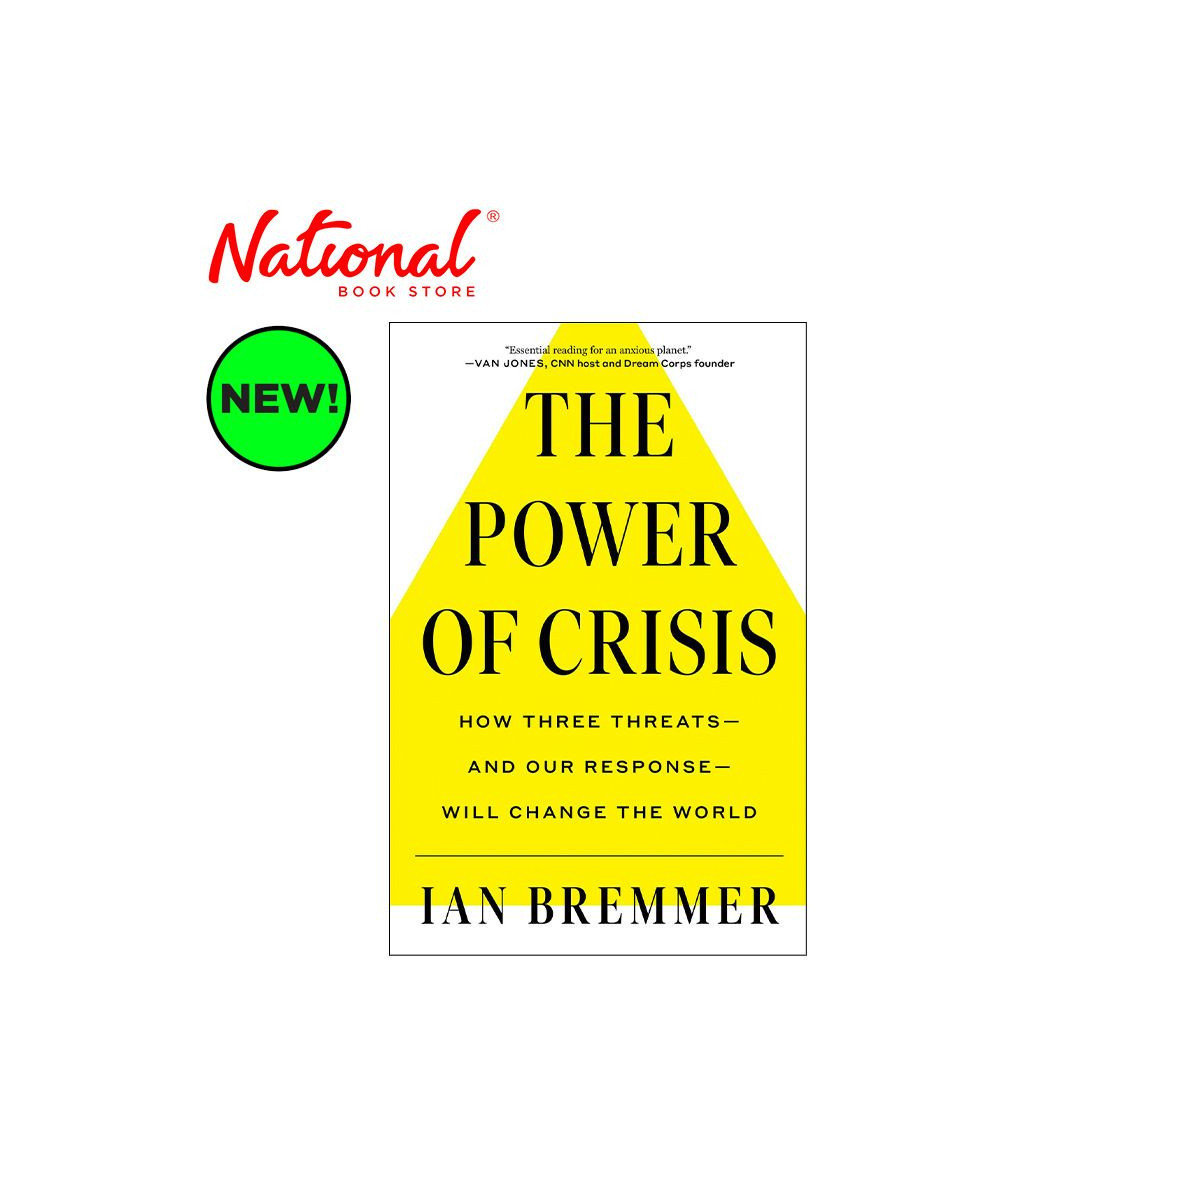 The Power of Crisis by Ian Bremmer - Hardcover - Politics - Current Events